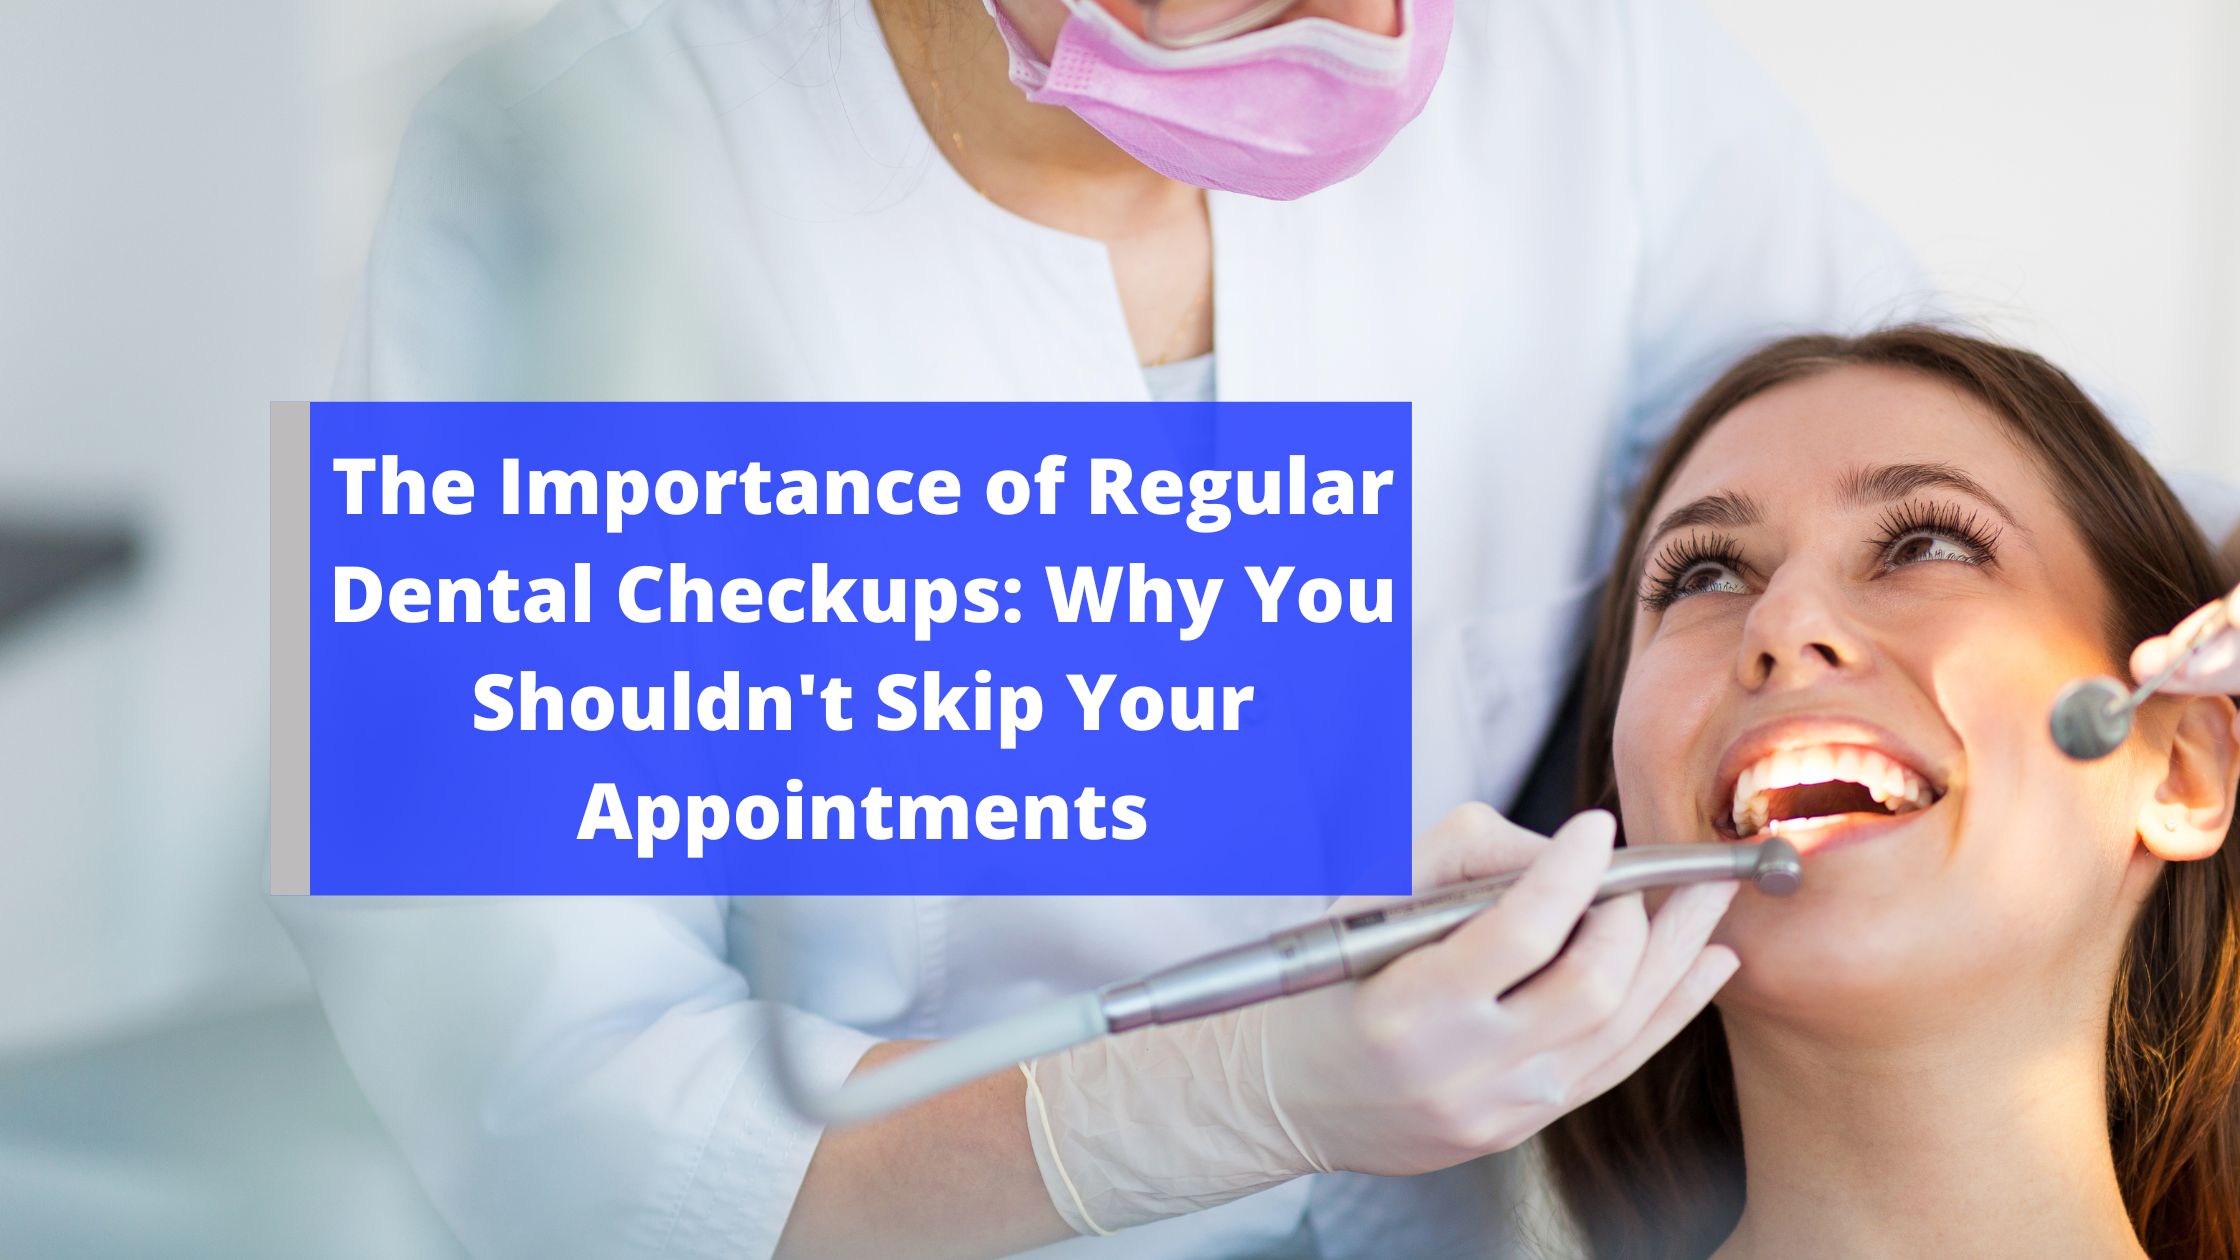 The Importance of Regular Dental Checkups: Why You Shouldn’t Skip Your Appointments